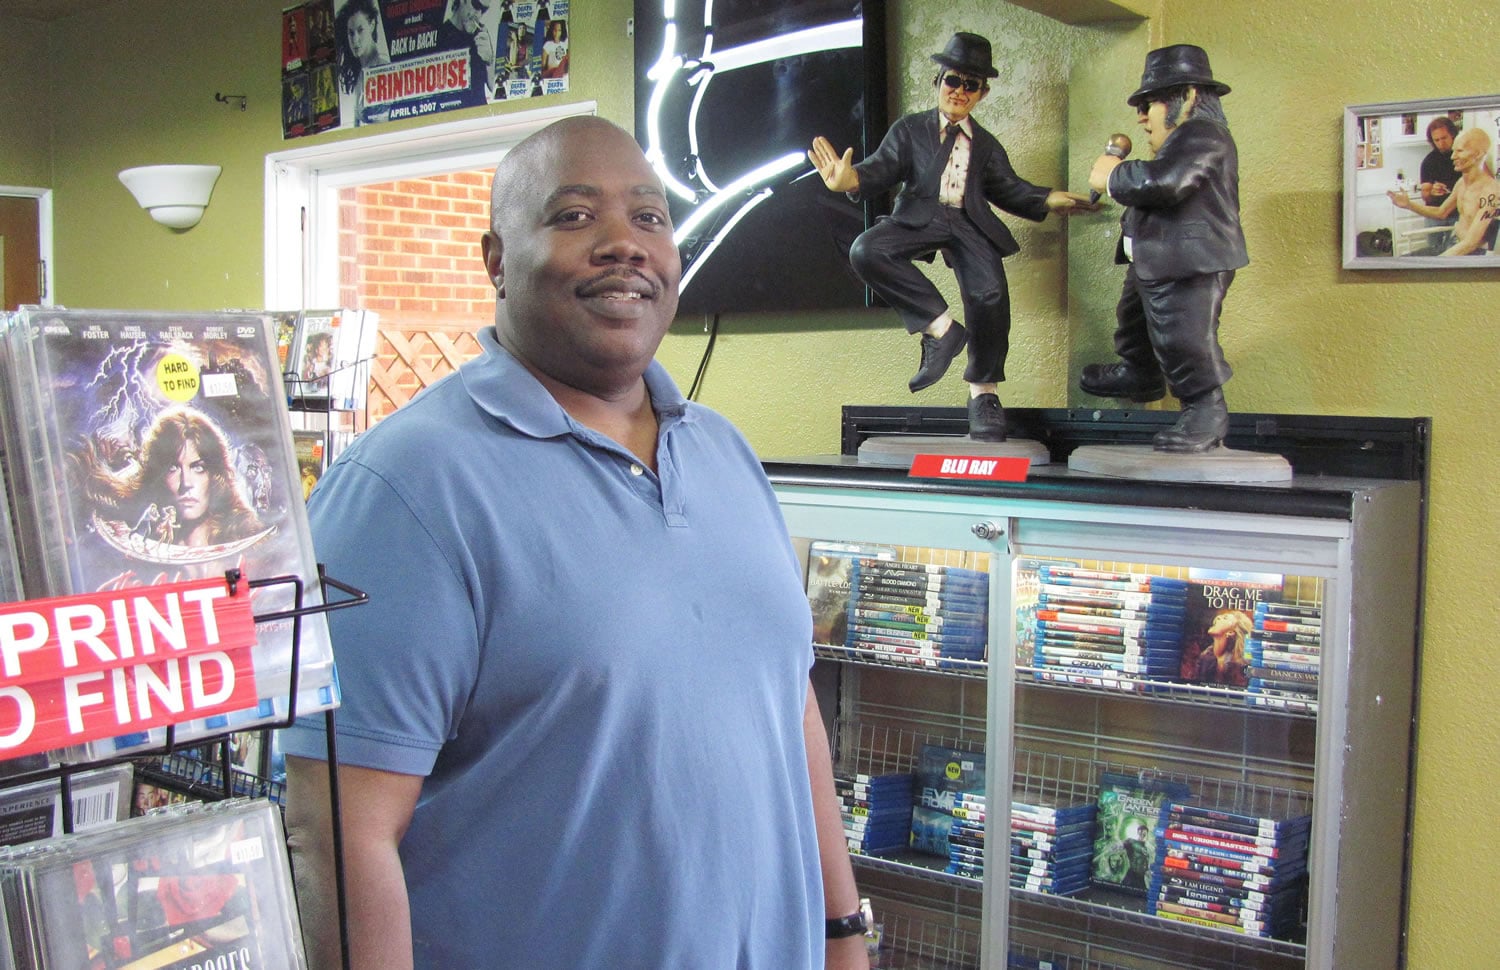 Darcy Hall buys, sells and trades a variety of DVDs, Blu-rays and video games. He recently relocated Disc E. Business, from Portland to downtown Washougal. &quot;The people in this town are awesome,&quot; Hall said.